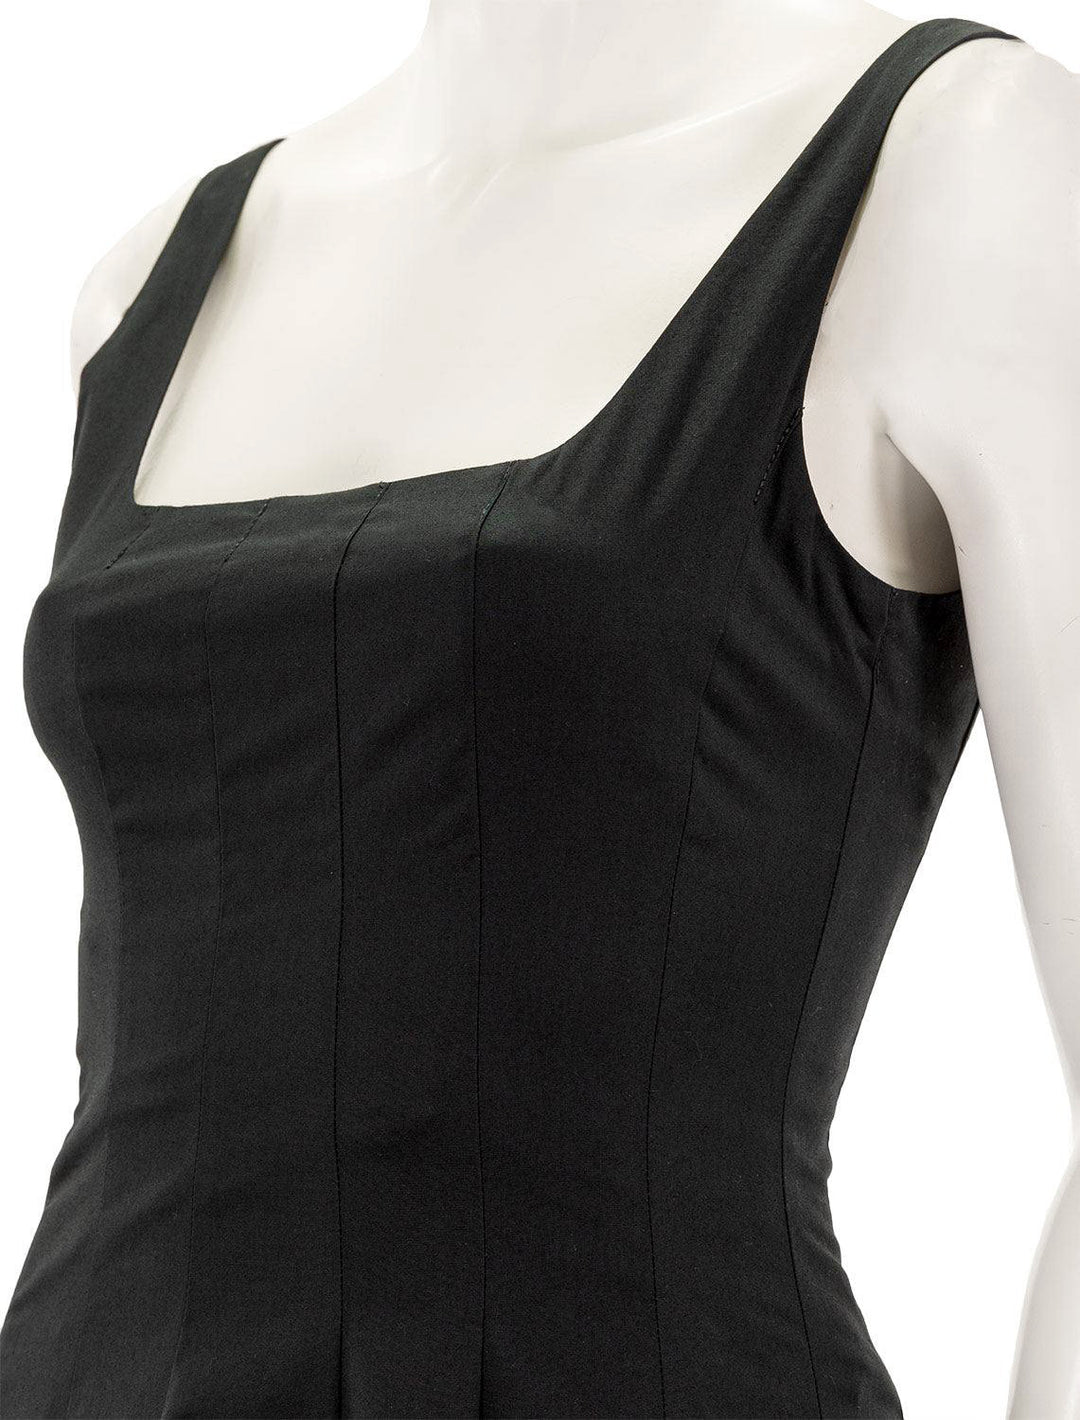 Close-up view of STAUD's wells dress in black.